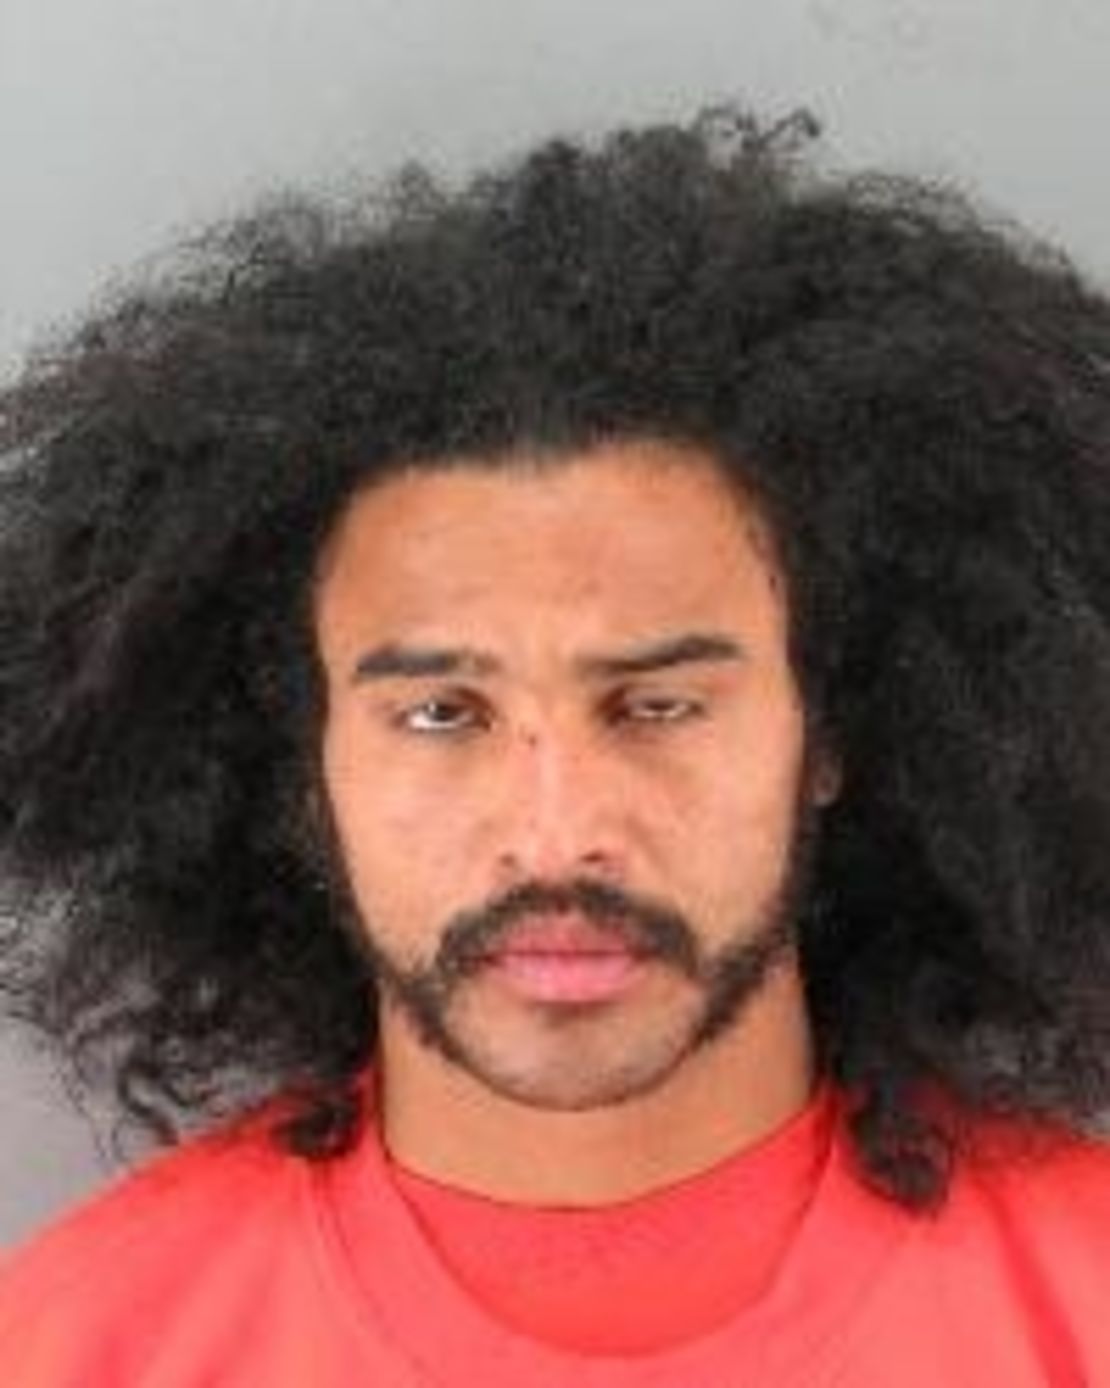 Yeiner Garizabalo was arrested after allegedly running amok at a San Francisco train station.